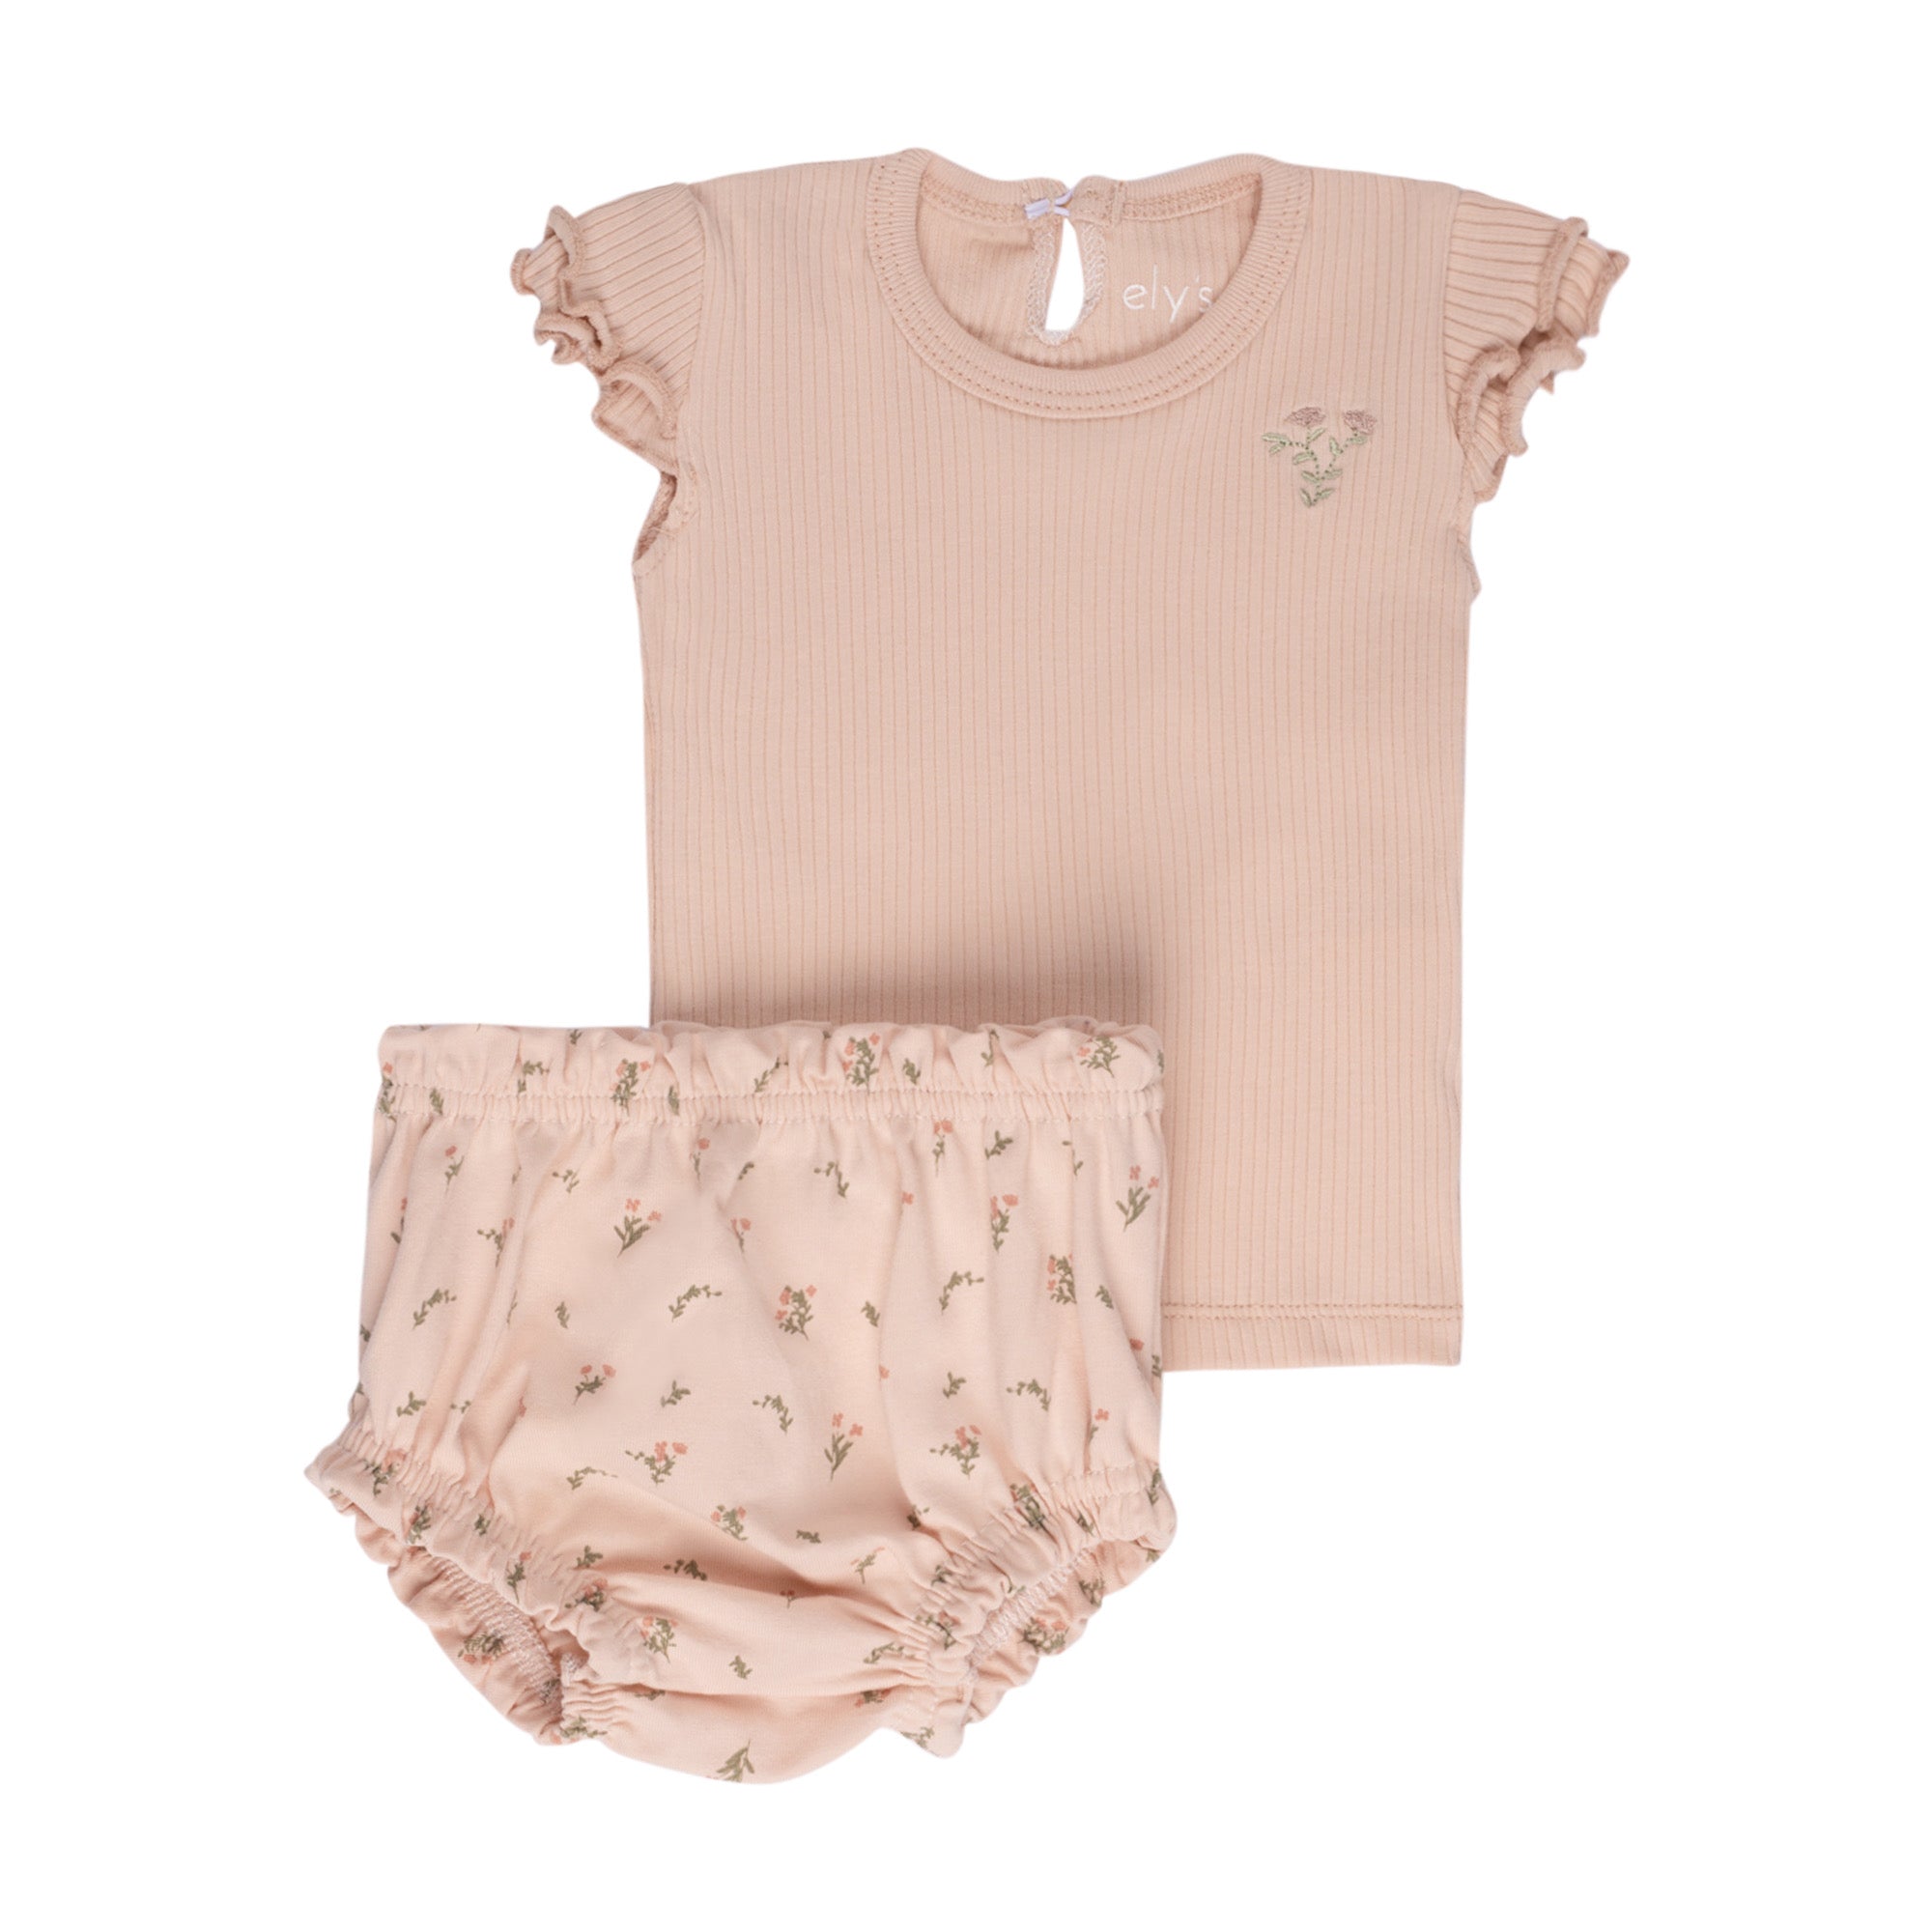 Jersey Cotton - Printed Ginkgo Collection - Tshirt + Bloomer - Girls